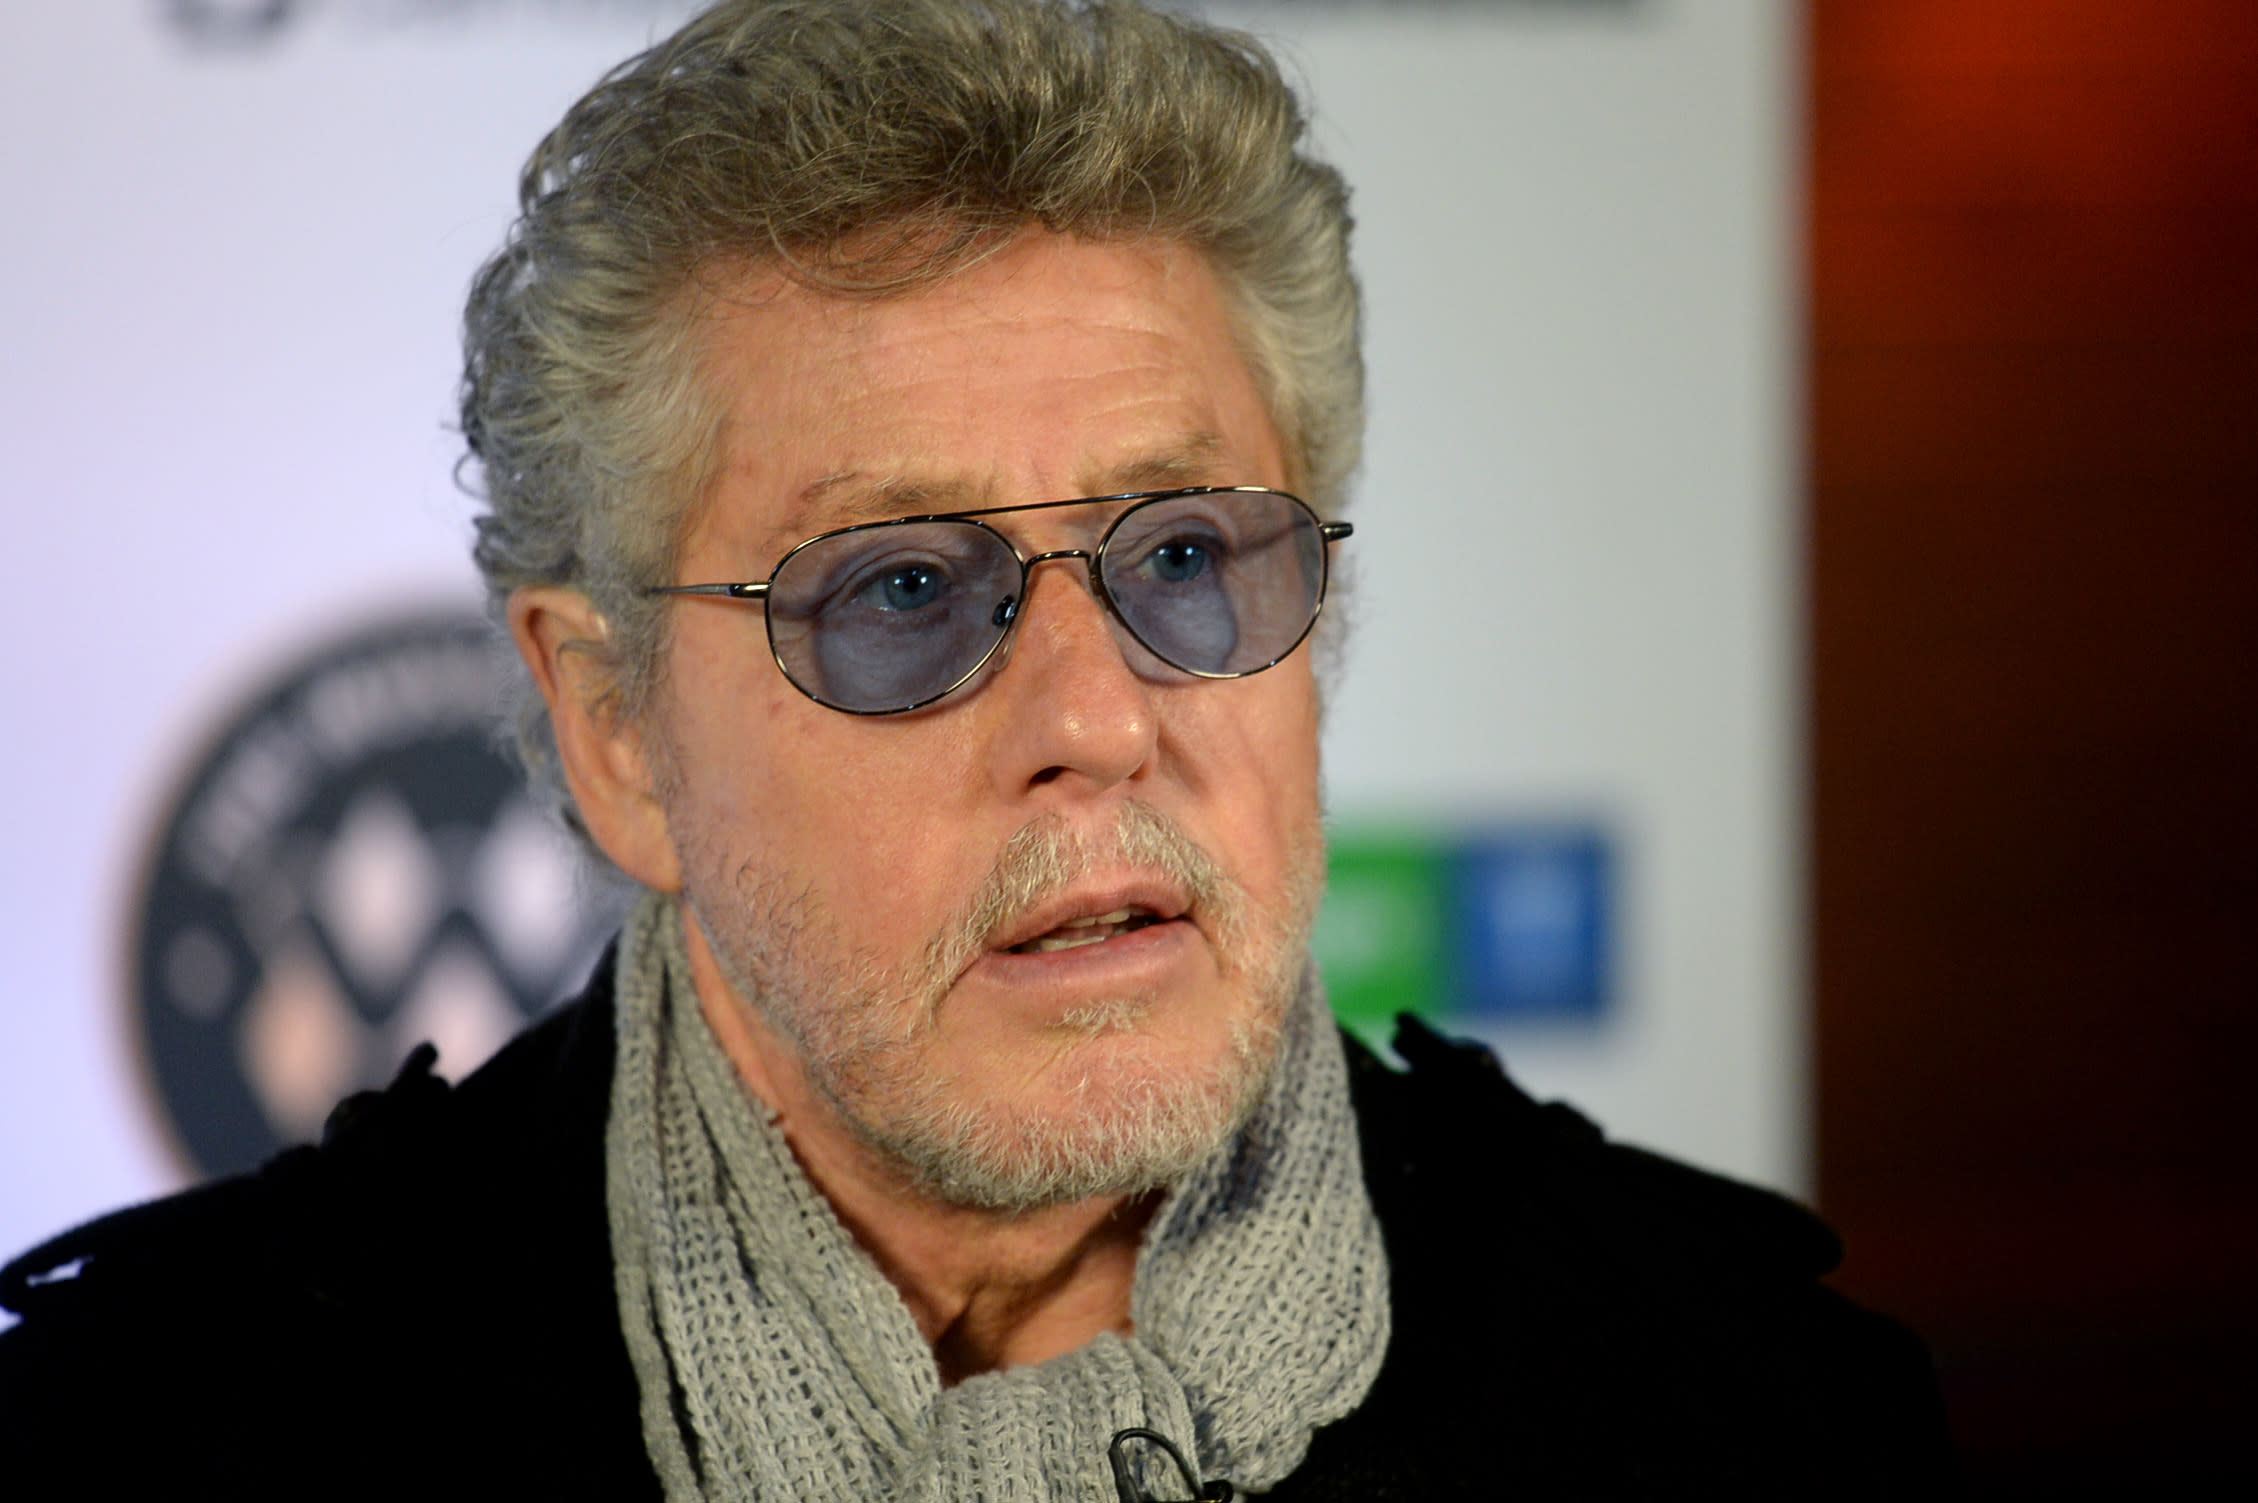 Roger Daltrey says fame distanced him from old friends